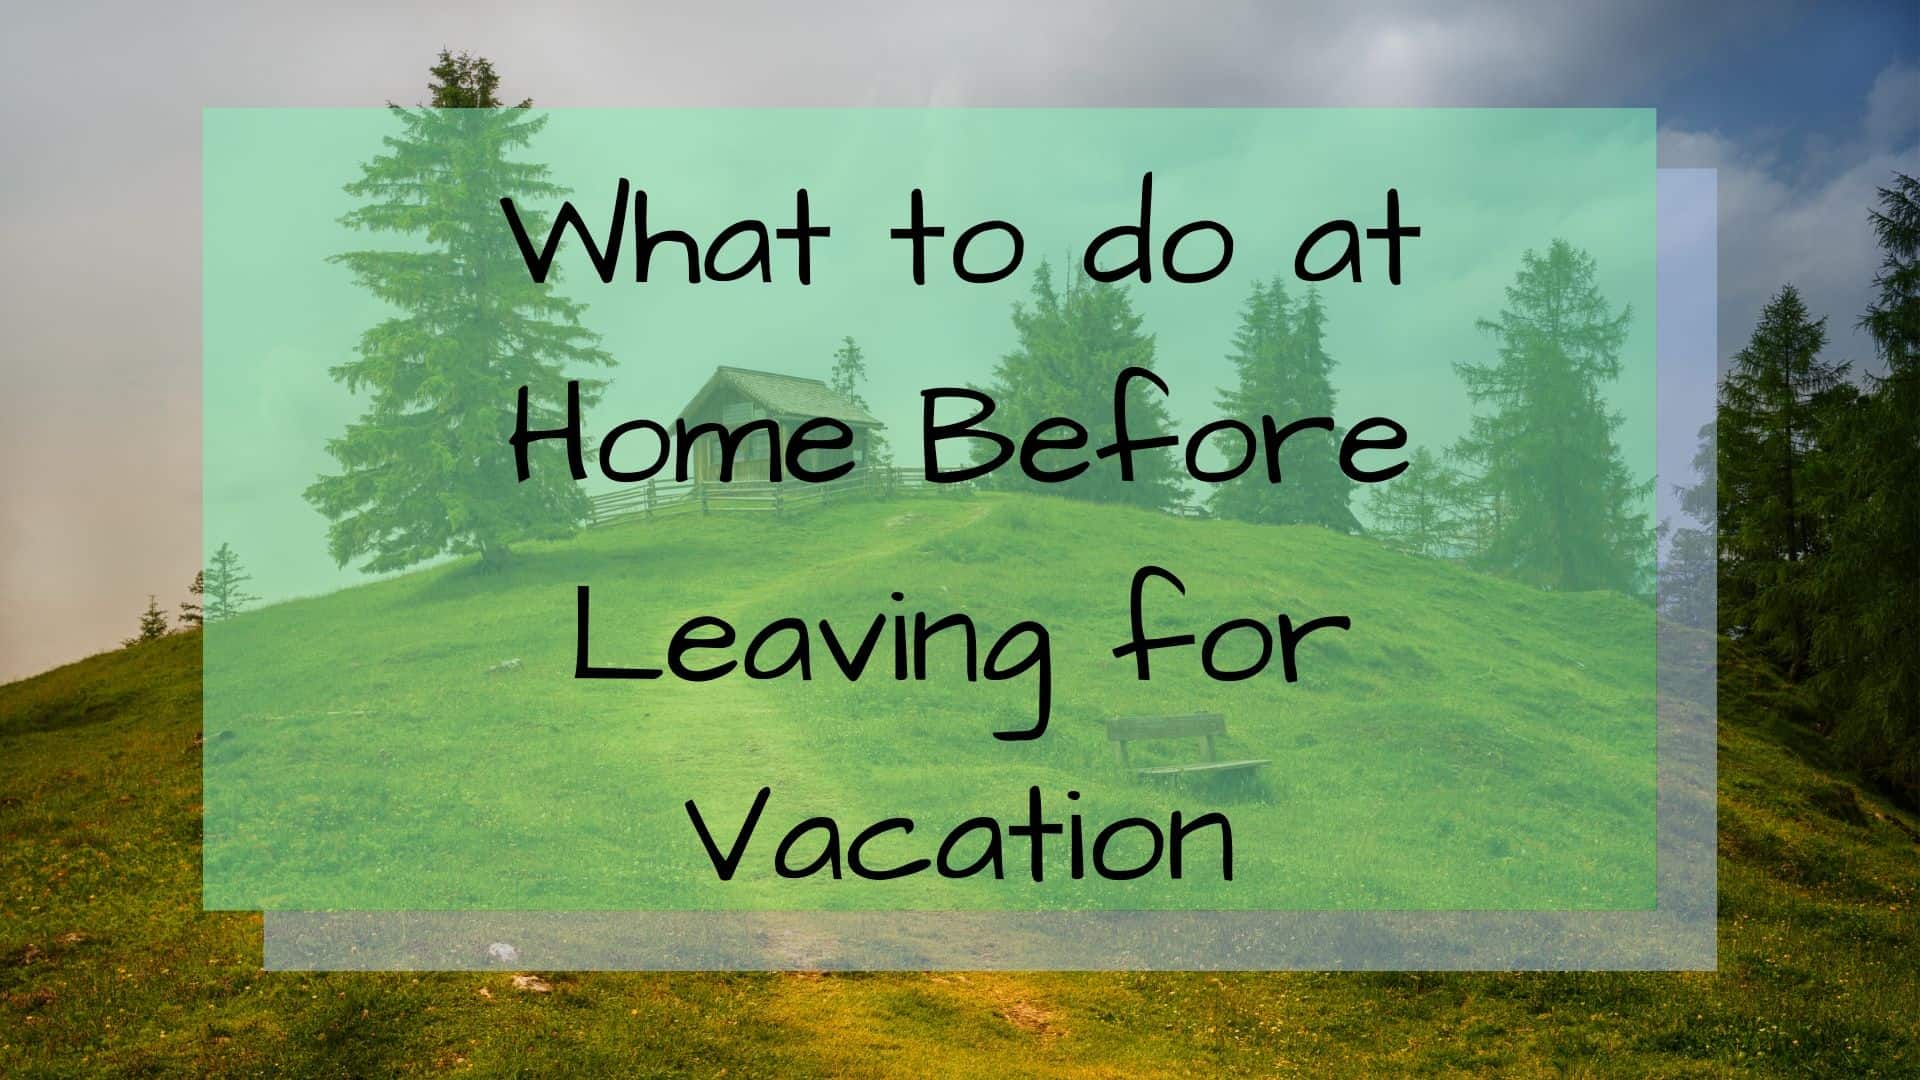 What to do at Home Before Leaving for Vacation